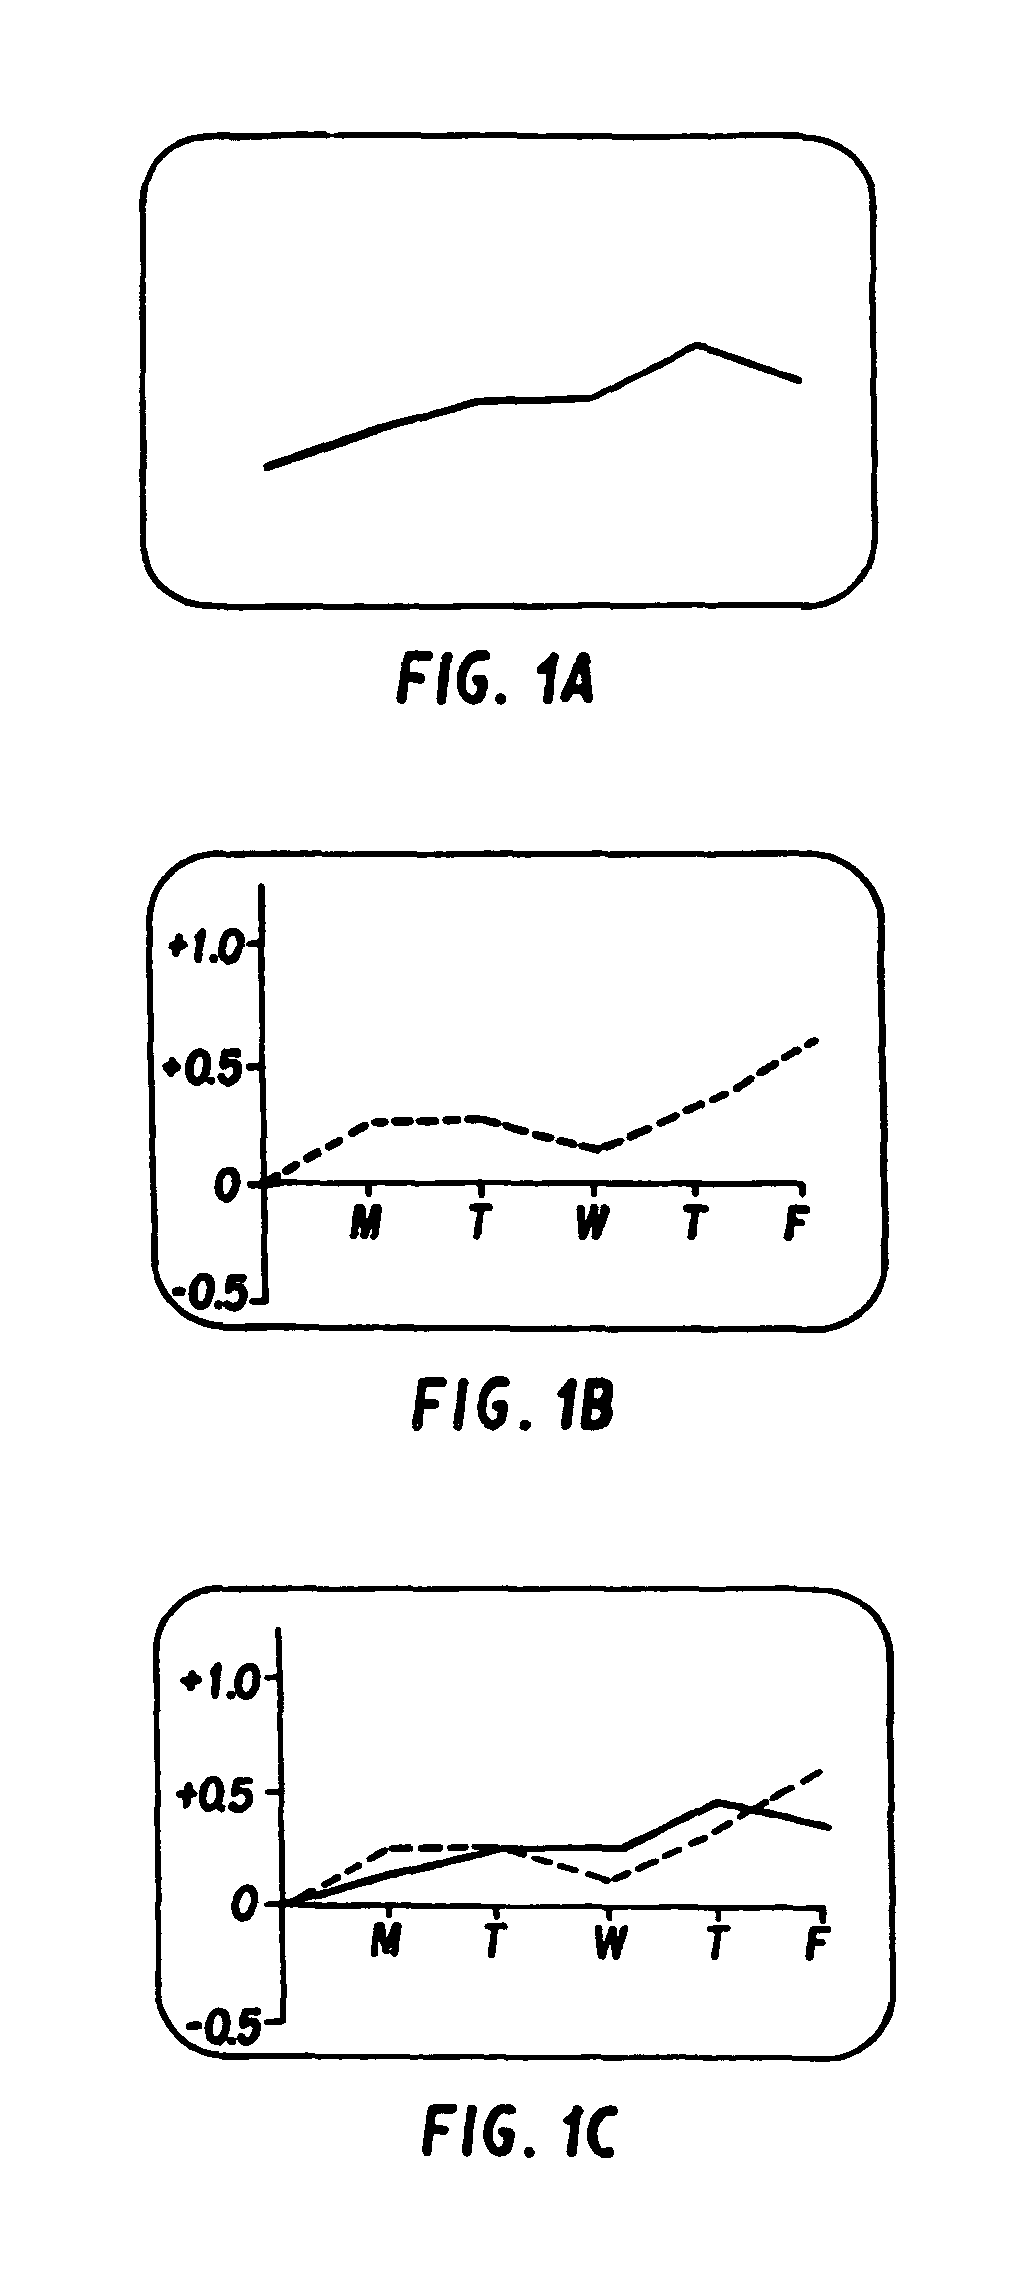 Signal processing apparatus and methods